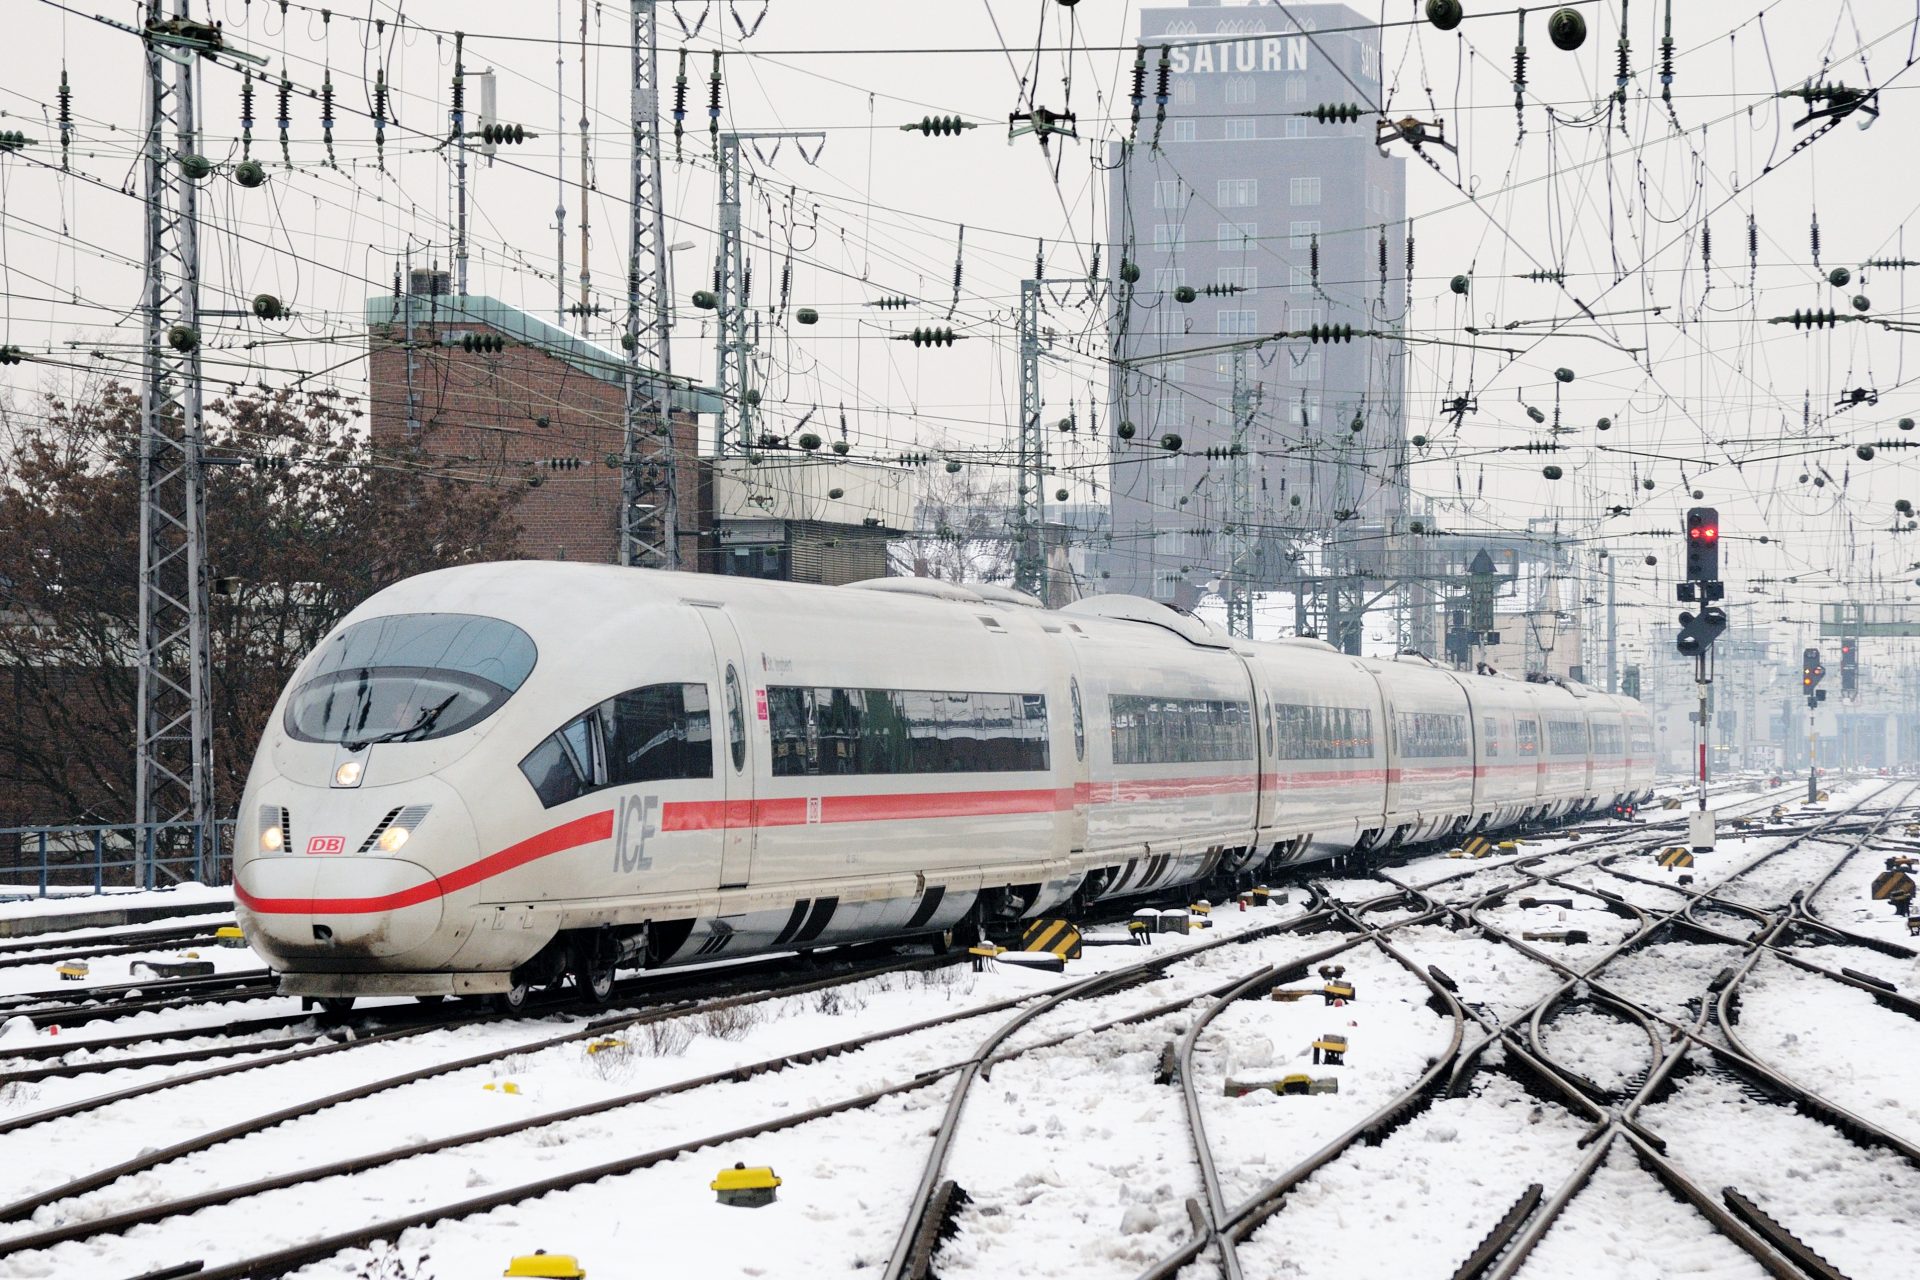 <p><span>ICE3 trains can travel so fast thanks to sixteen electric motors, which give the trains an impressive 11,000 horsepower. The fleet of ICE3 trains operates throughout Germany and even includes international routes to cities such as Paris, Brussels, and Amsterdam. </span></p>